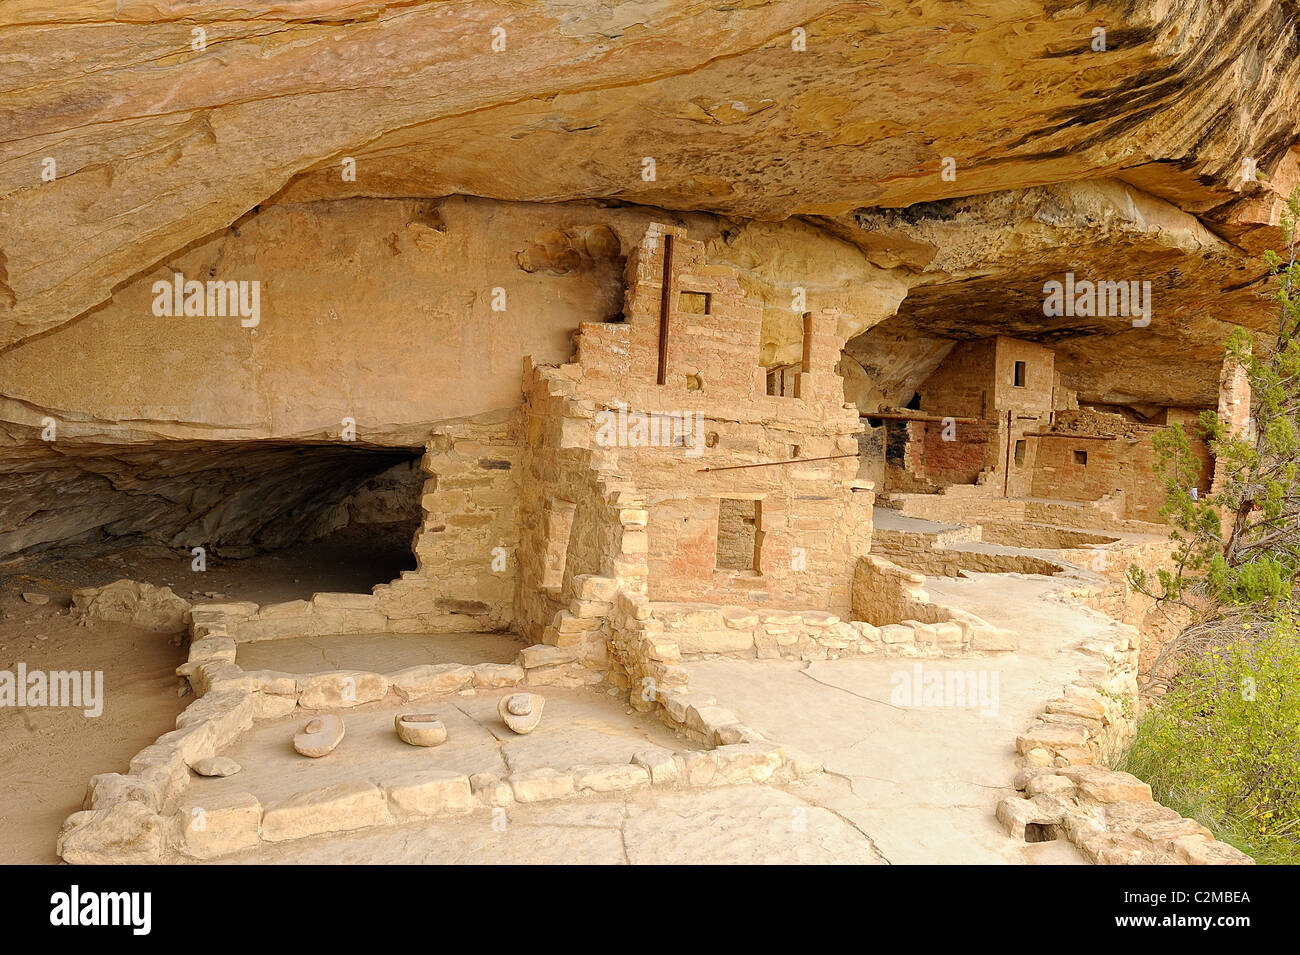 Dwellings in Balcony House, cliff dwelling in Mesa Verde National Park Stock Photo